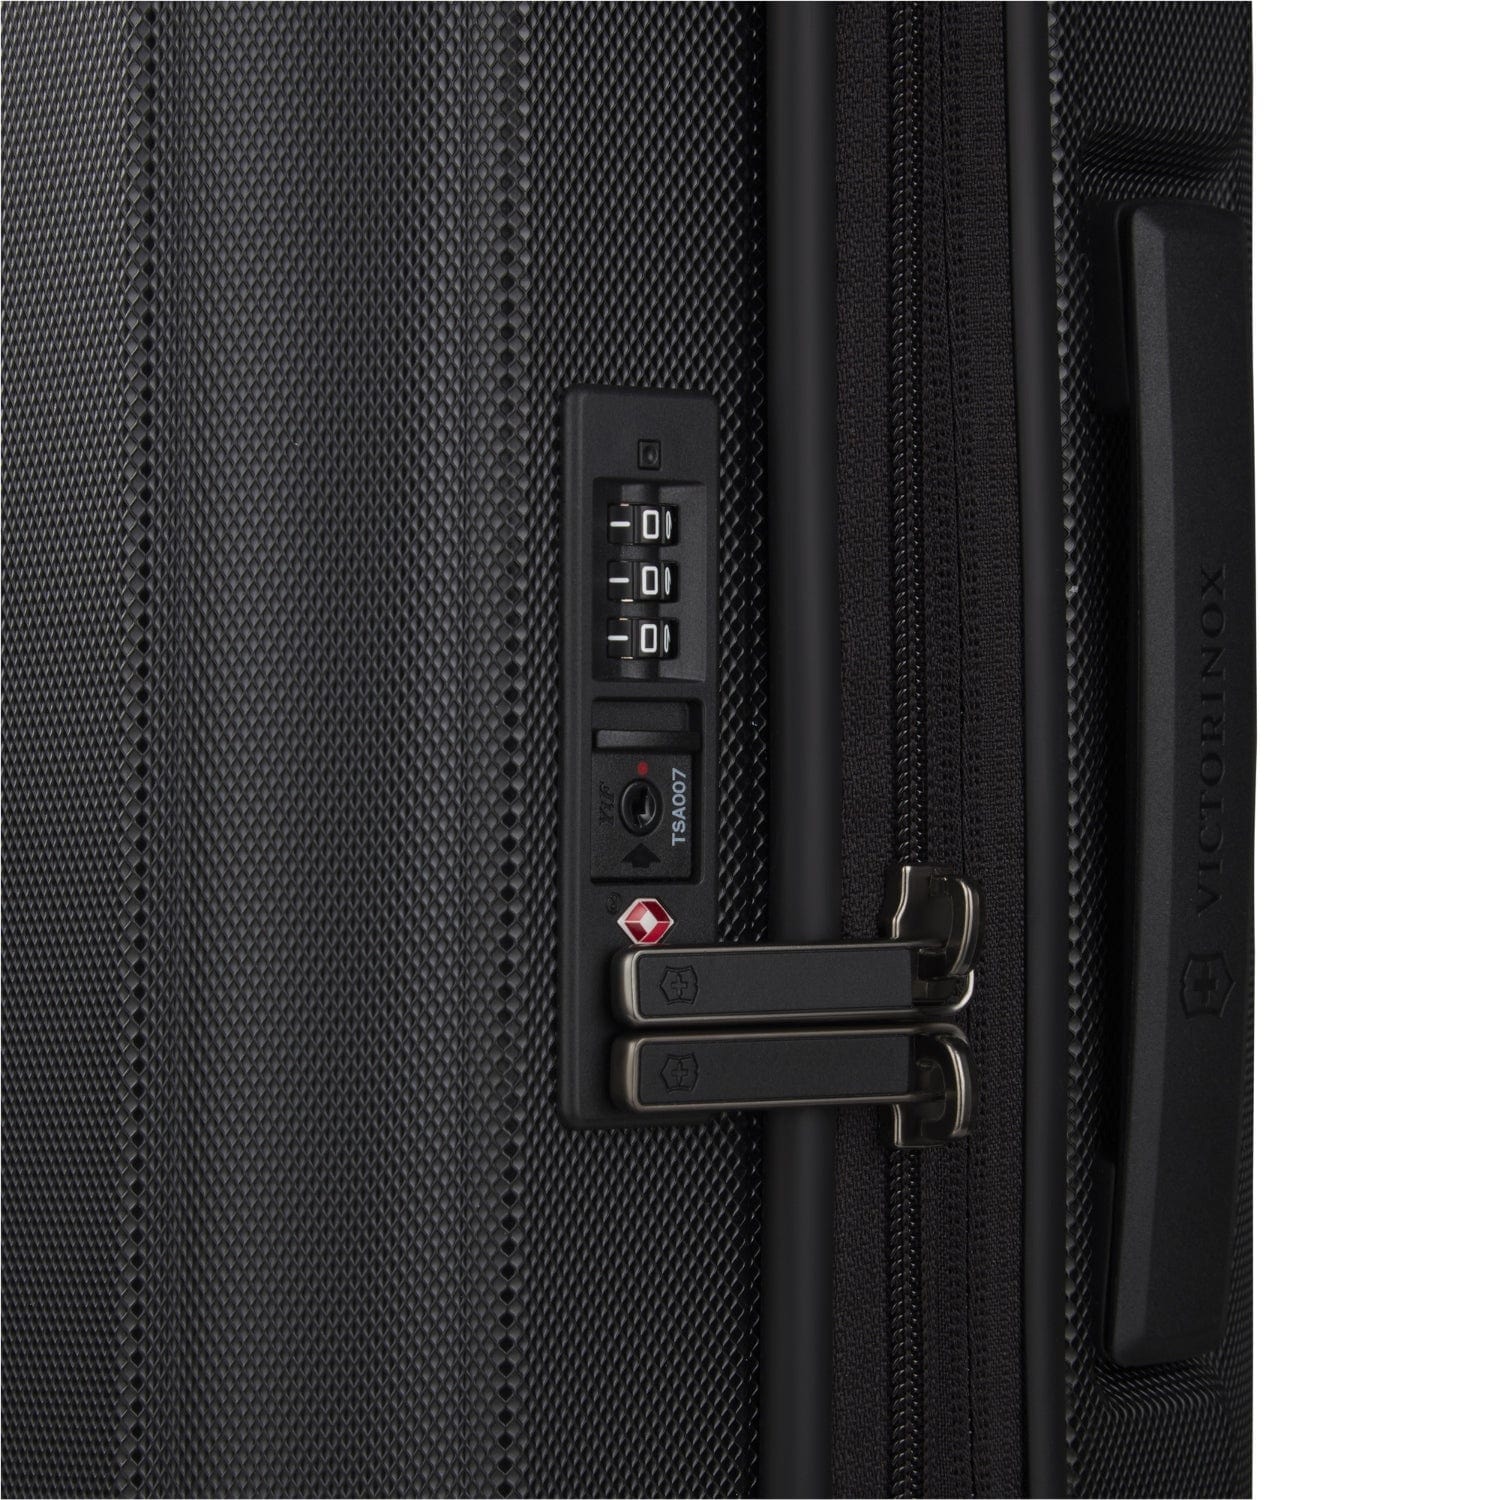 Victorinox Werks Traveler 6.0 74cm Hardcase Expandable 4 Double Wheel Check-In Luggage Trolley Black - 609972